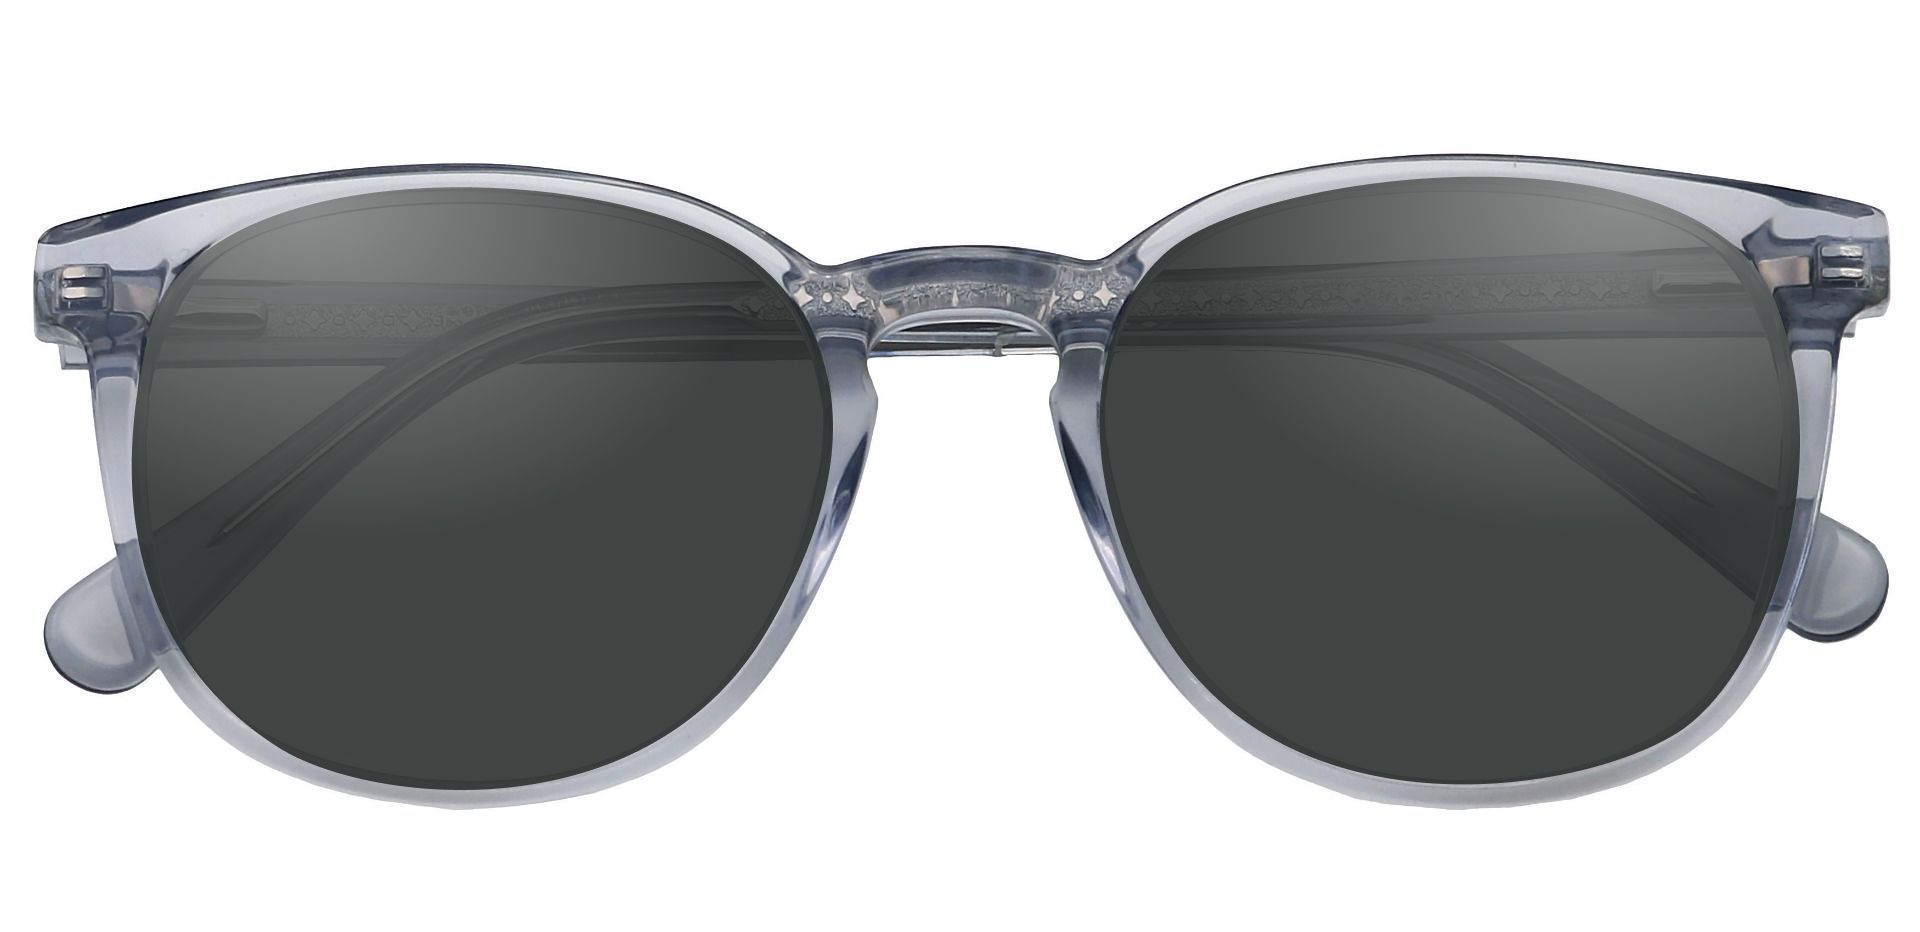 Nebula Round Lined Bifocal Sunglasses - Gray Frame With Gray Lenses